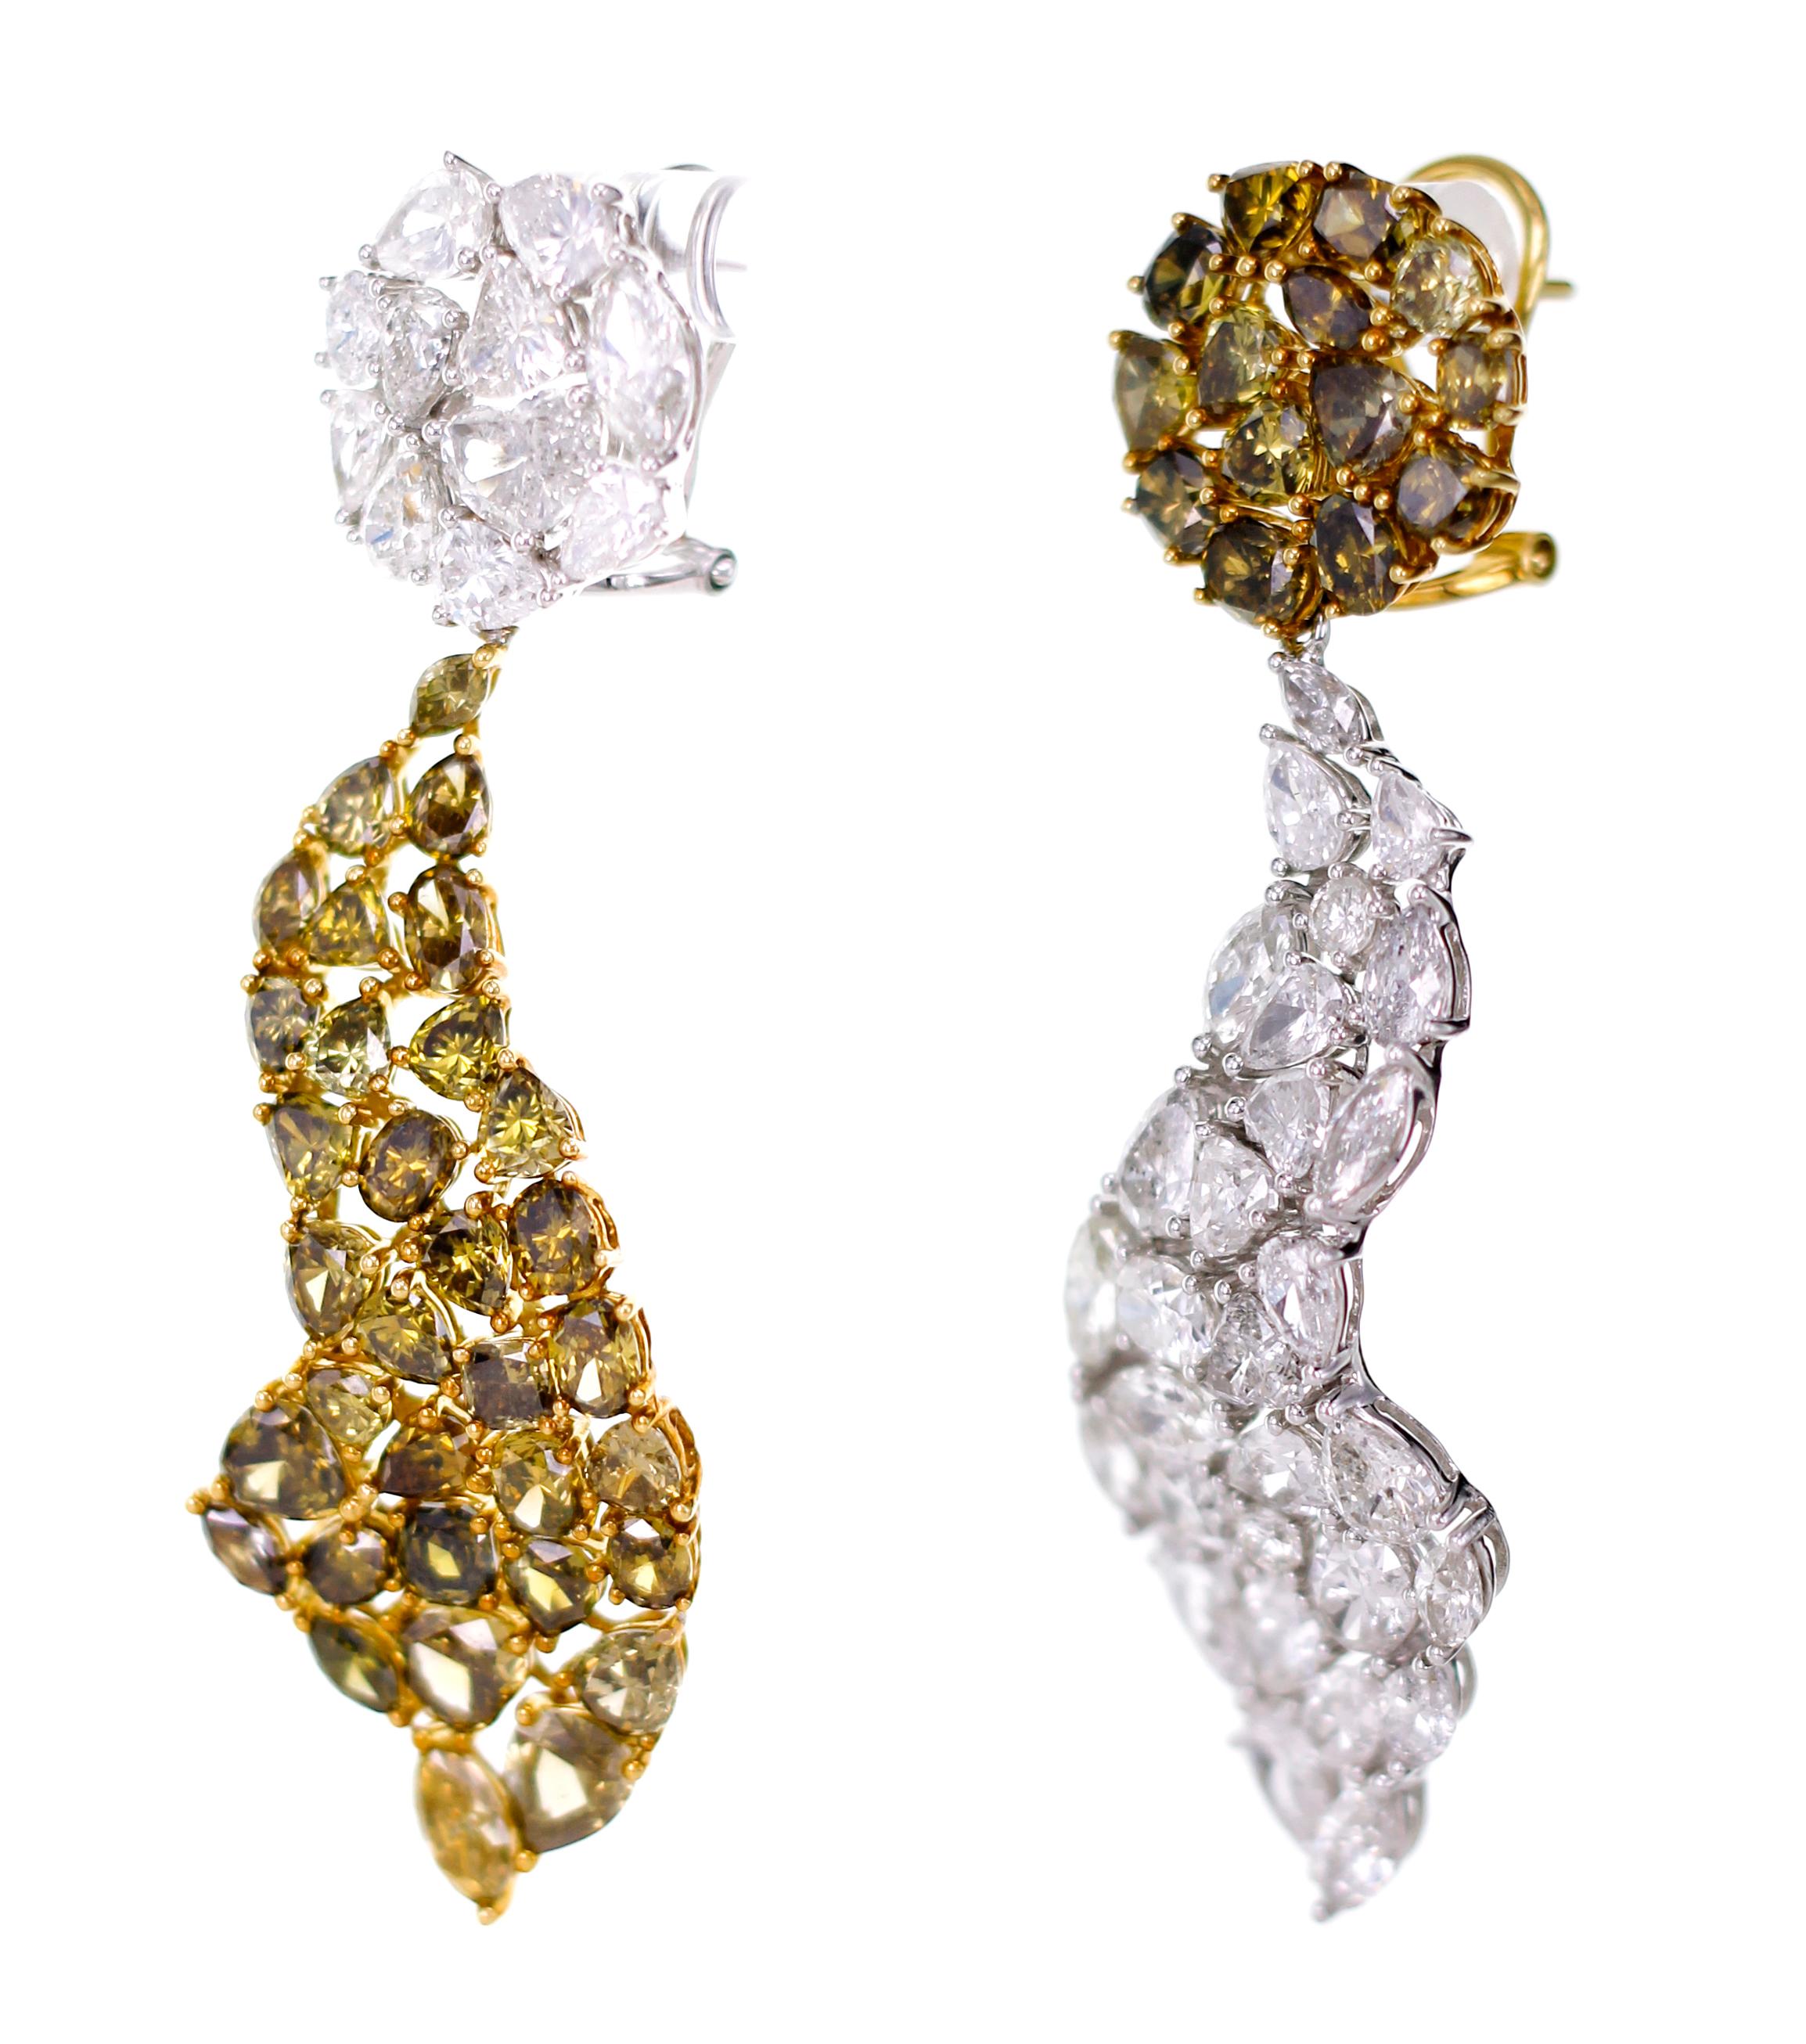 A quirky mix of natural green diamond and white brilliant diamond, this dangle earring breaks the norm. Once you enter a party owning this, you will be a center of attraction for sure! 